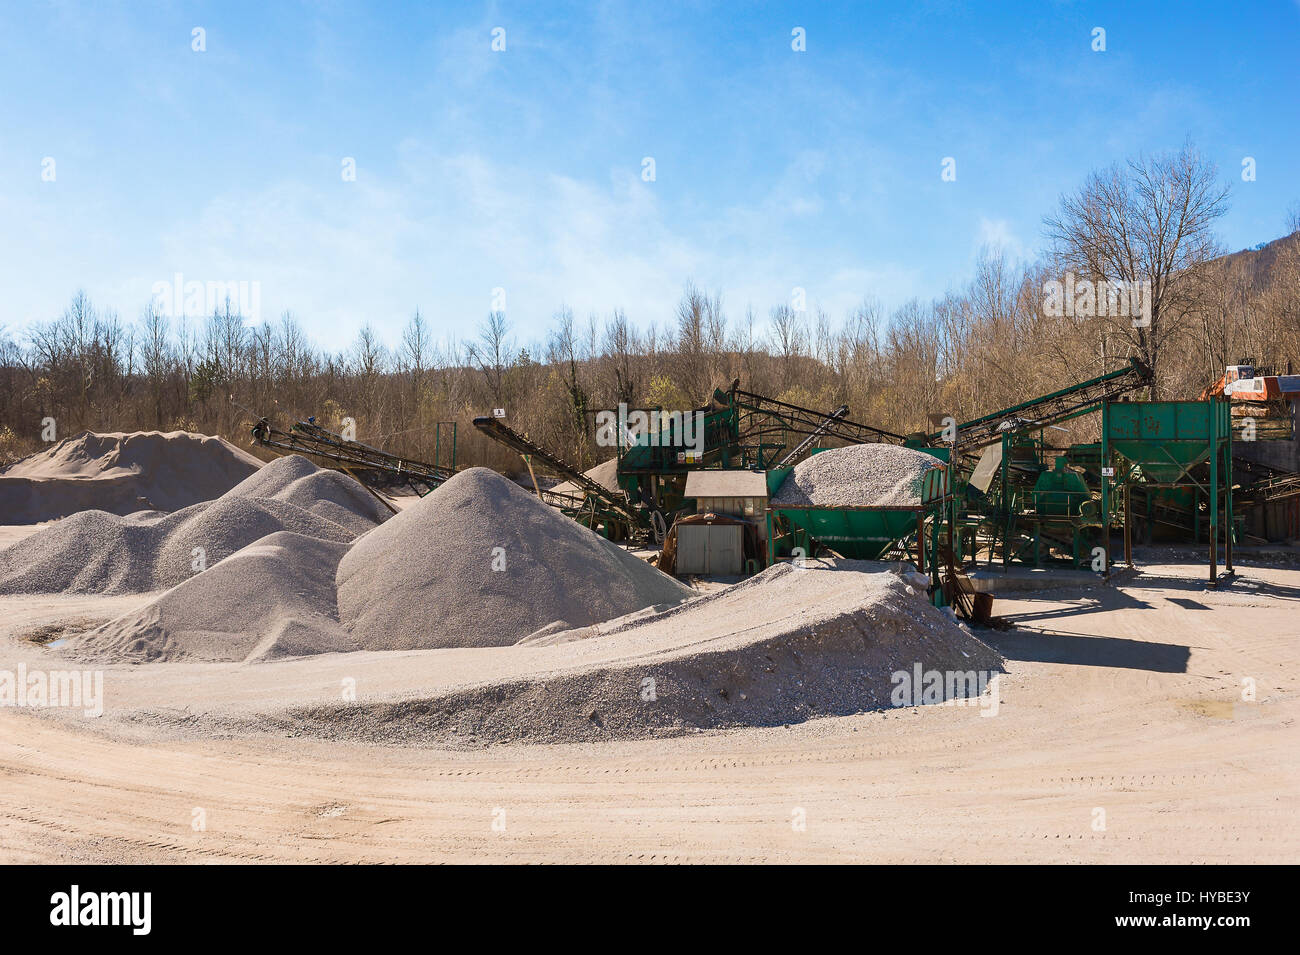 Extraction gravel. Machinery distribution and classification by size gravel. Conveyors for transporting gravel.Gravel quarry. Construction industry. Stock Photo